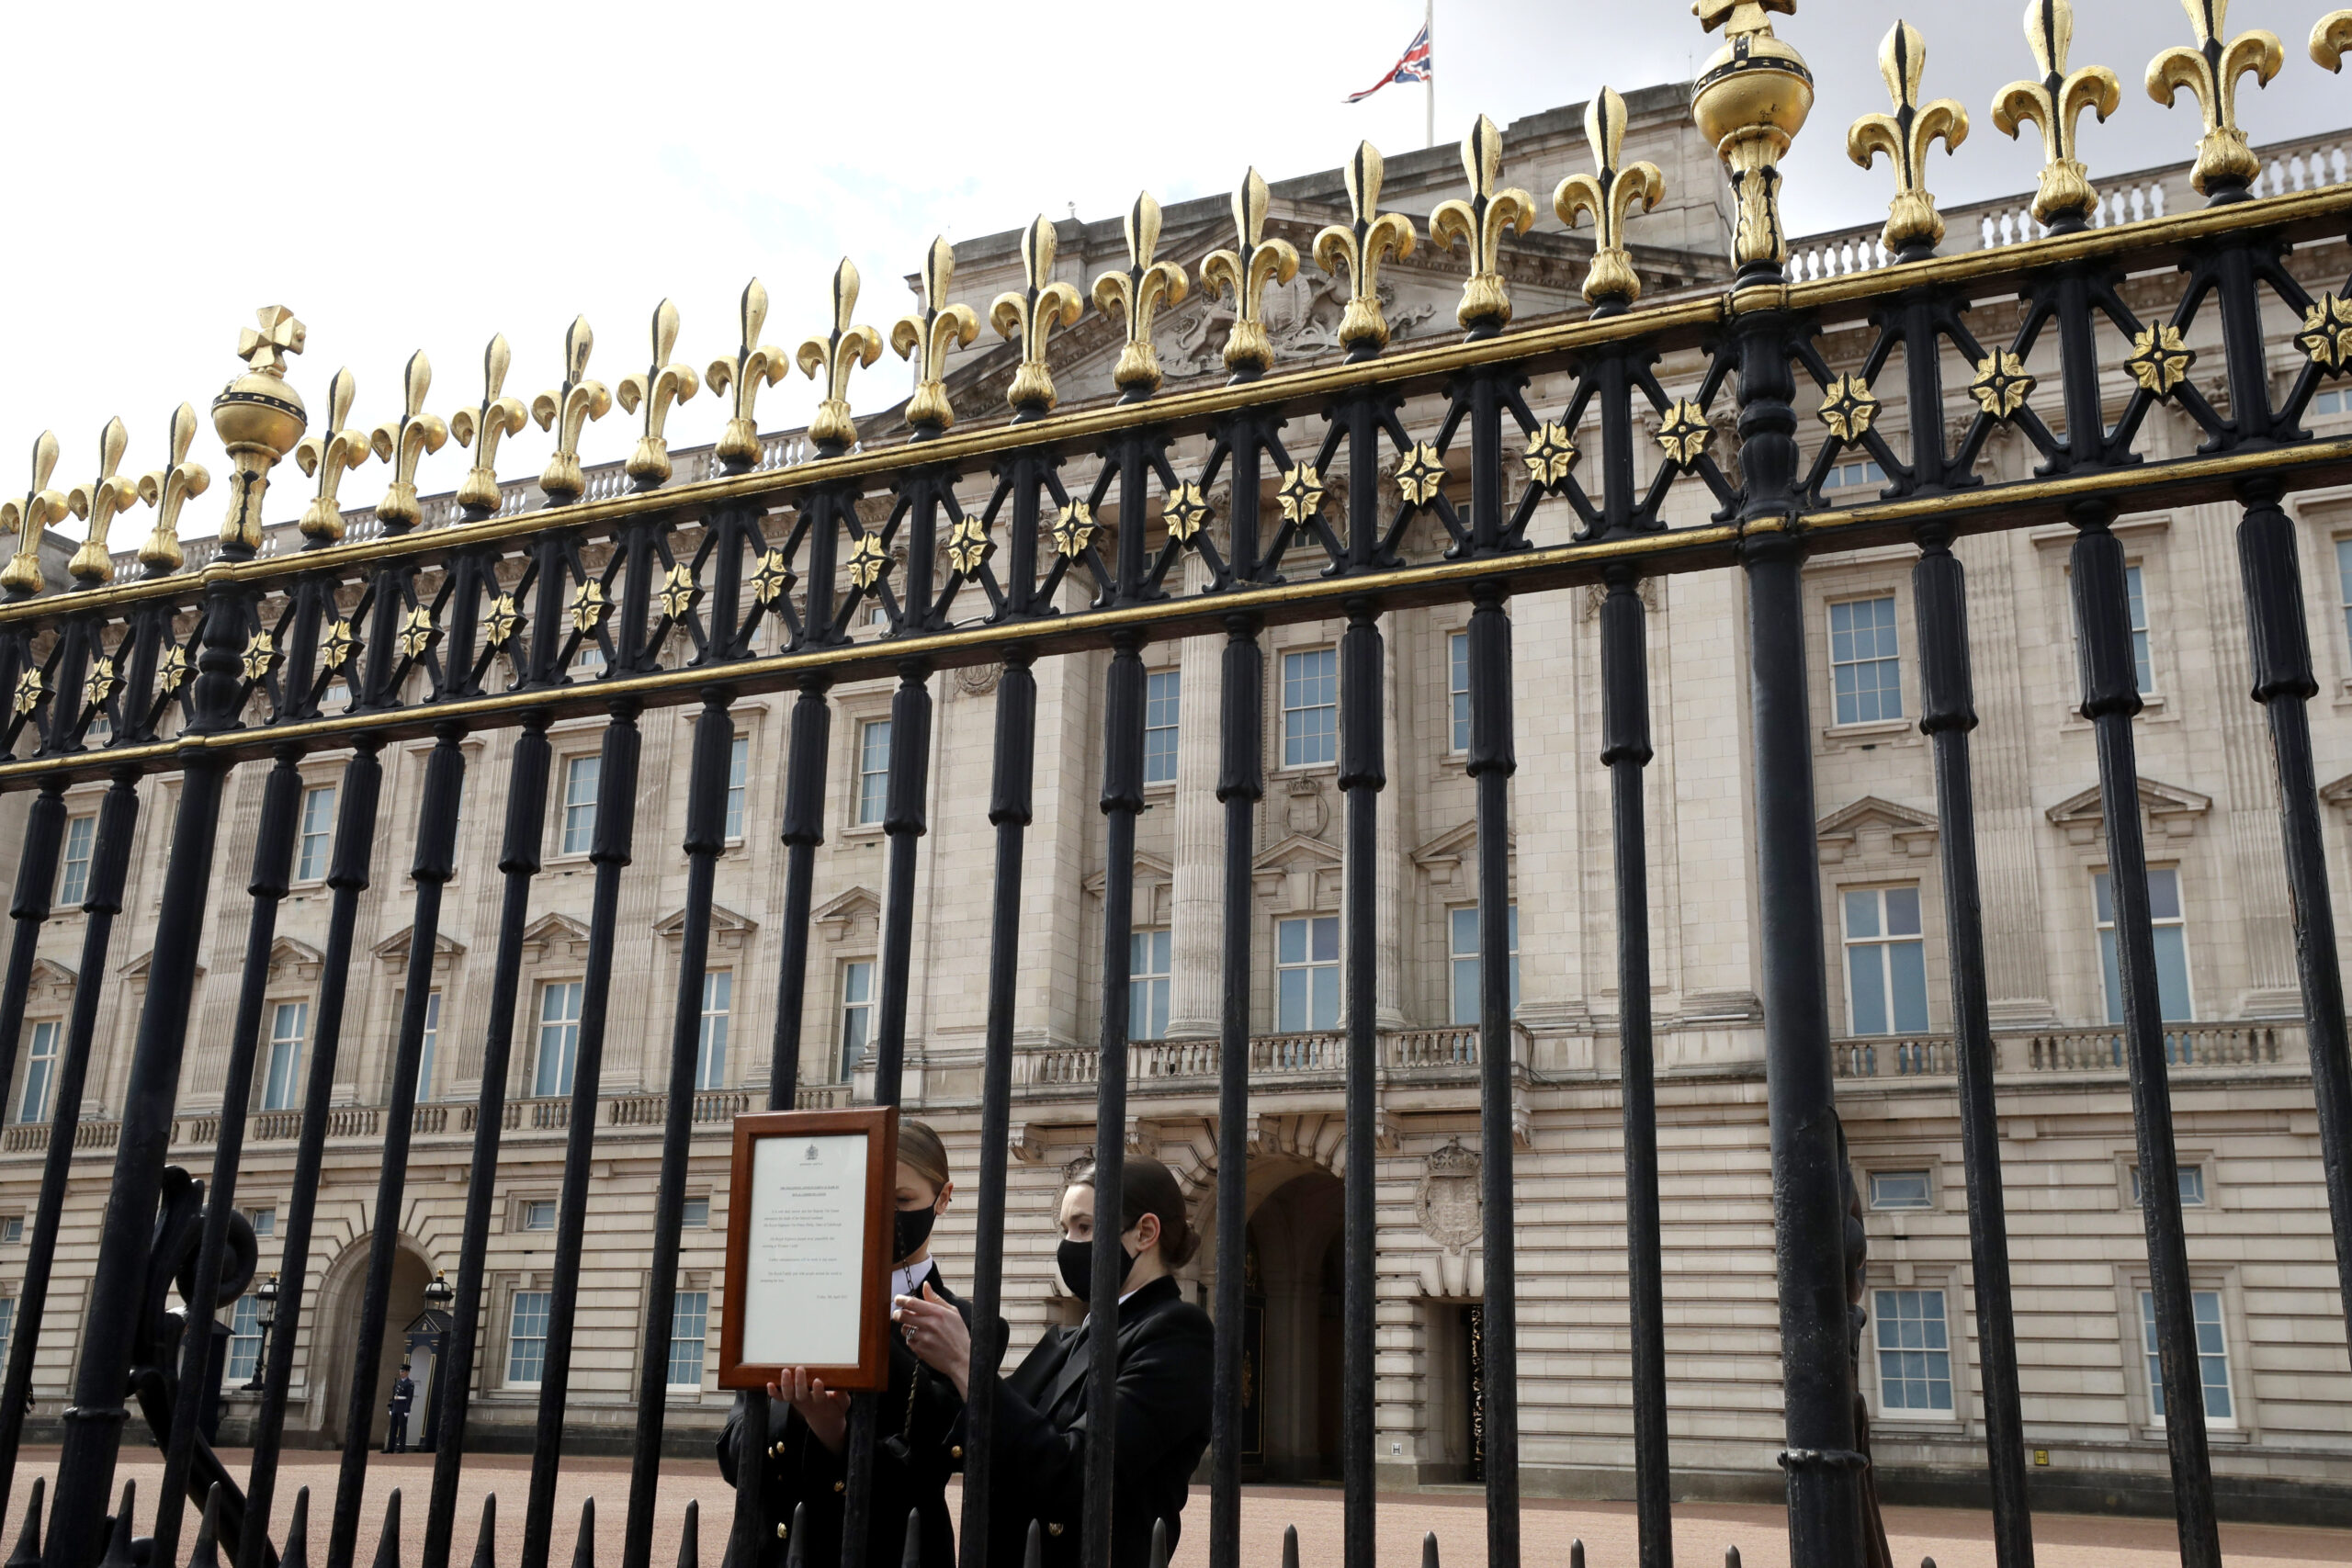 The Union flag hangs at half staff as members of staff attach an announcement, regarding the death of Britain's Prince Philip, to the fence of Buckingham Palace in London, Friday, April 9, 2021. Buckingham Palace officials say Prince Philip, the husband of Queen Elizabeth II, has died. He was 99. Philip spent a month in hospital earlier this year before being released on March 16 to return to Windsor Castle. (AP Photo/Matt Dunham)